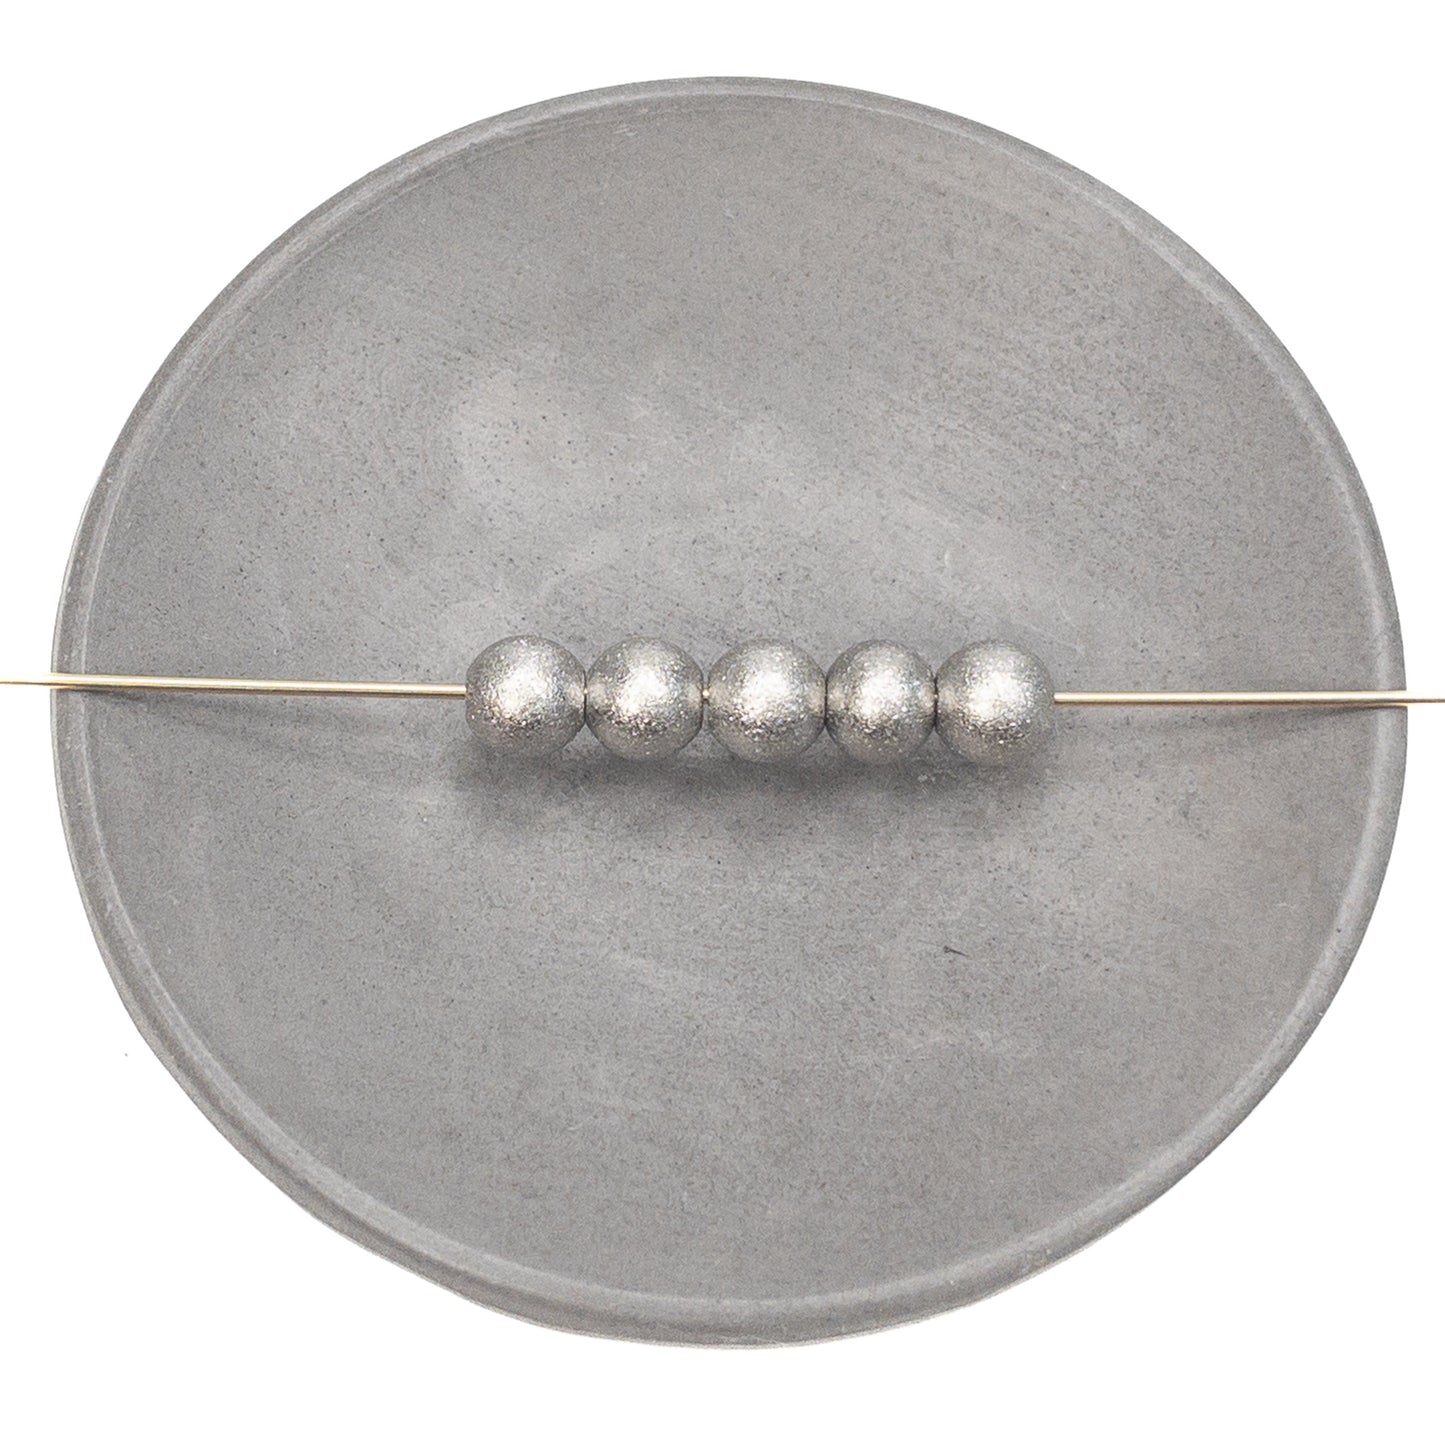 Stardust 6mm Round Large-Hole Bead (Stainless Steel) - 5 pcs.